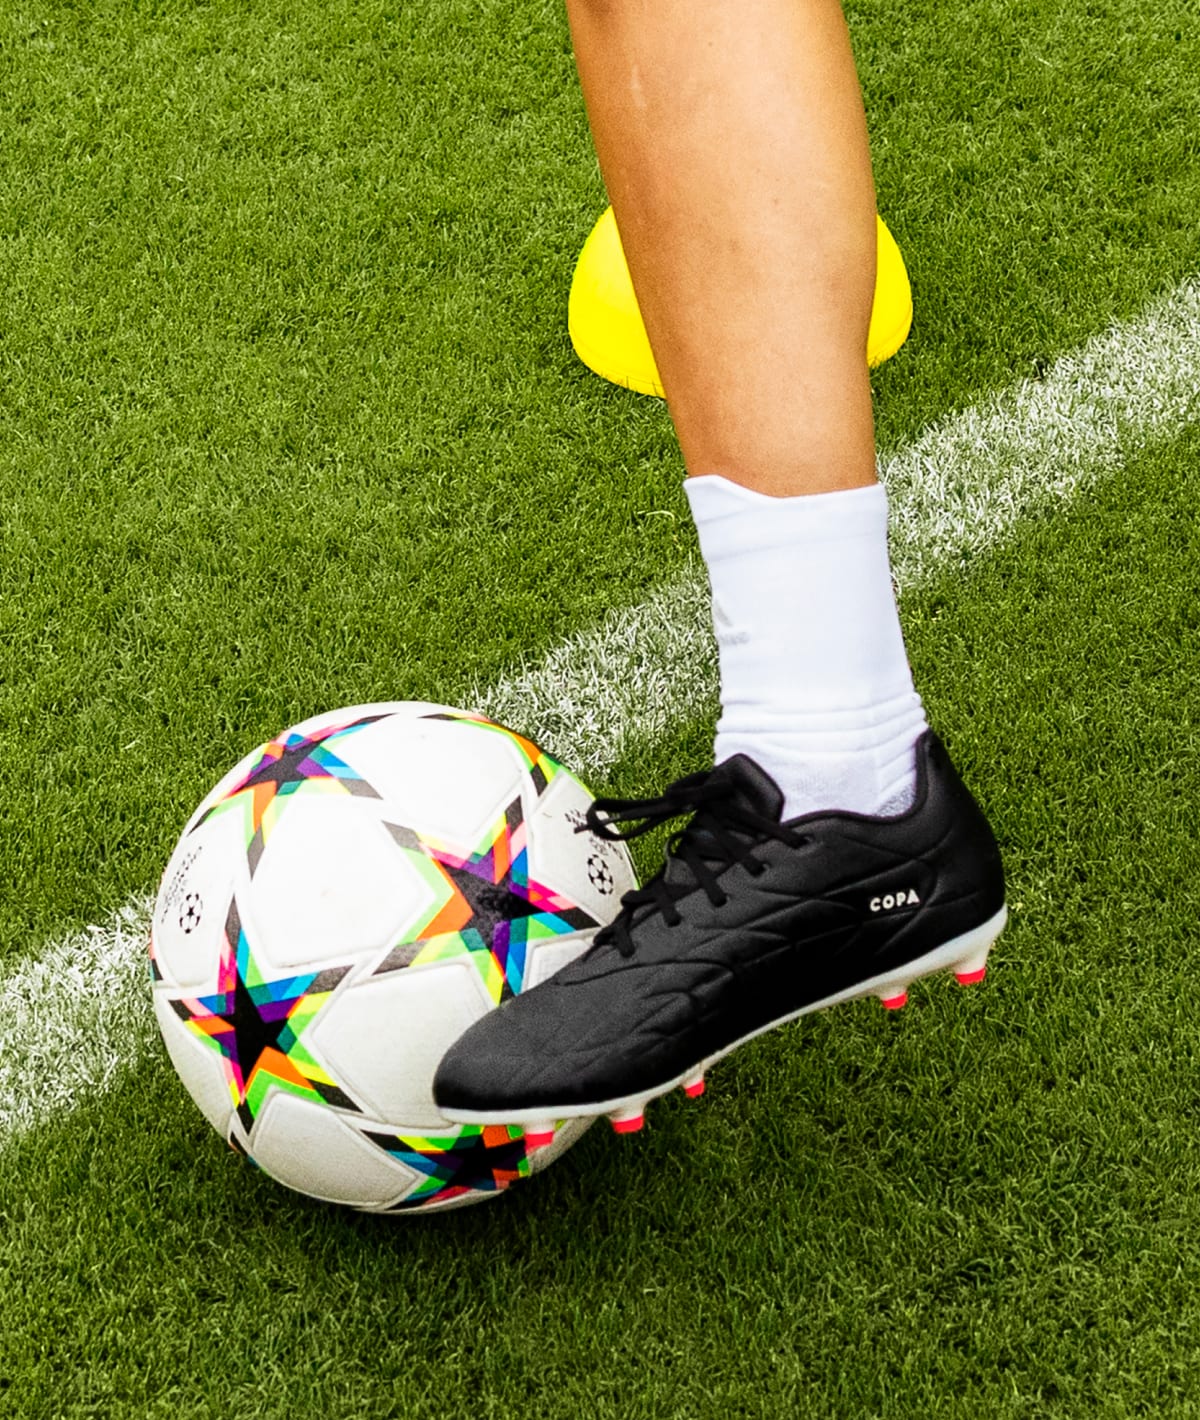 Can You Wear Turf Soccer Cleats For Indoor Soccer? Find Out Now!